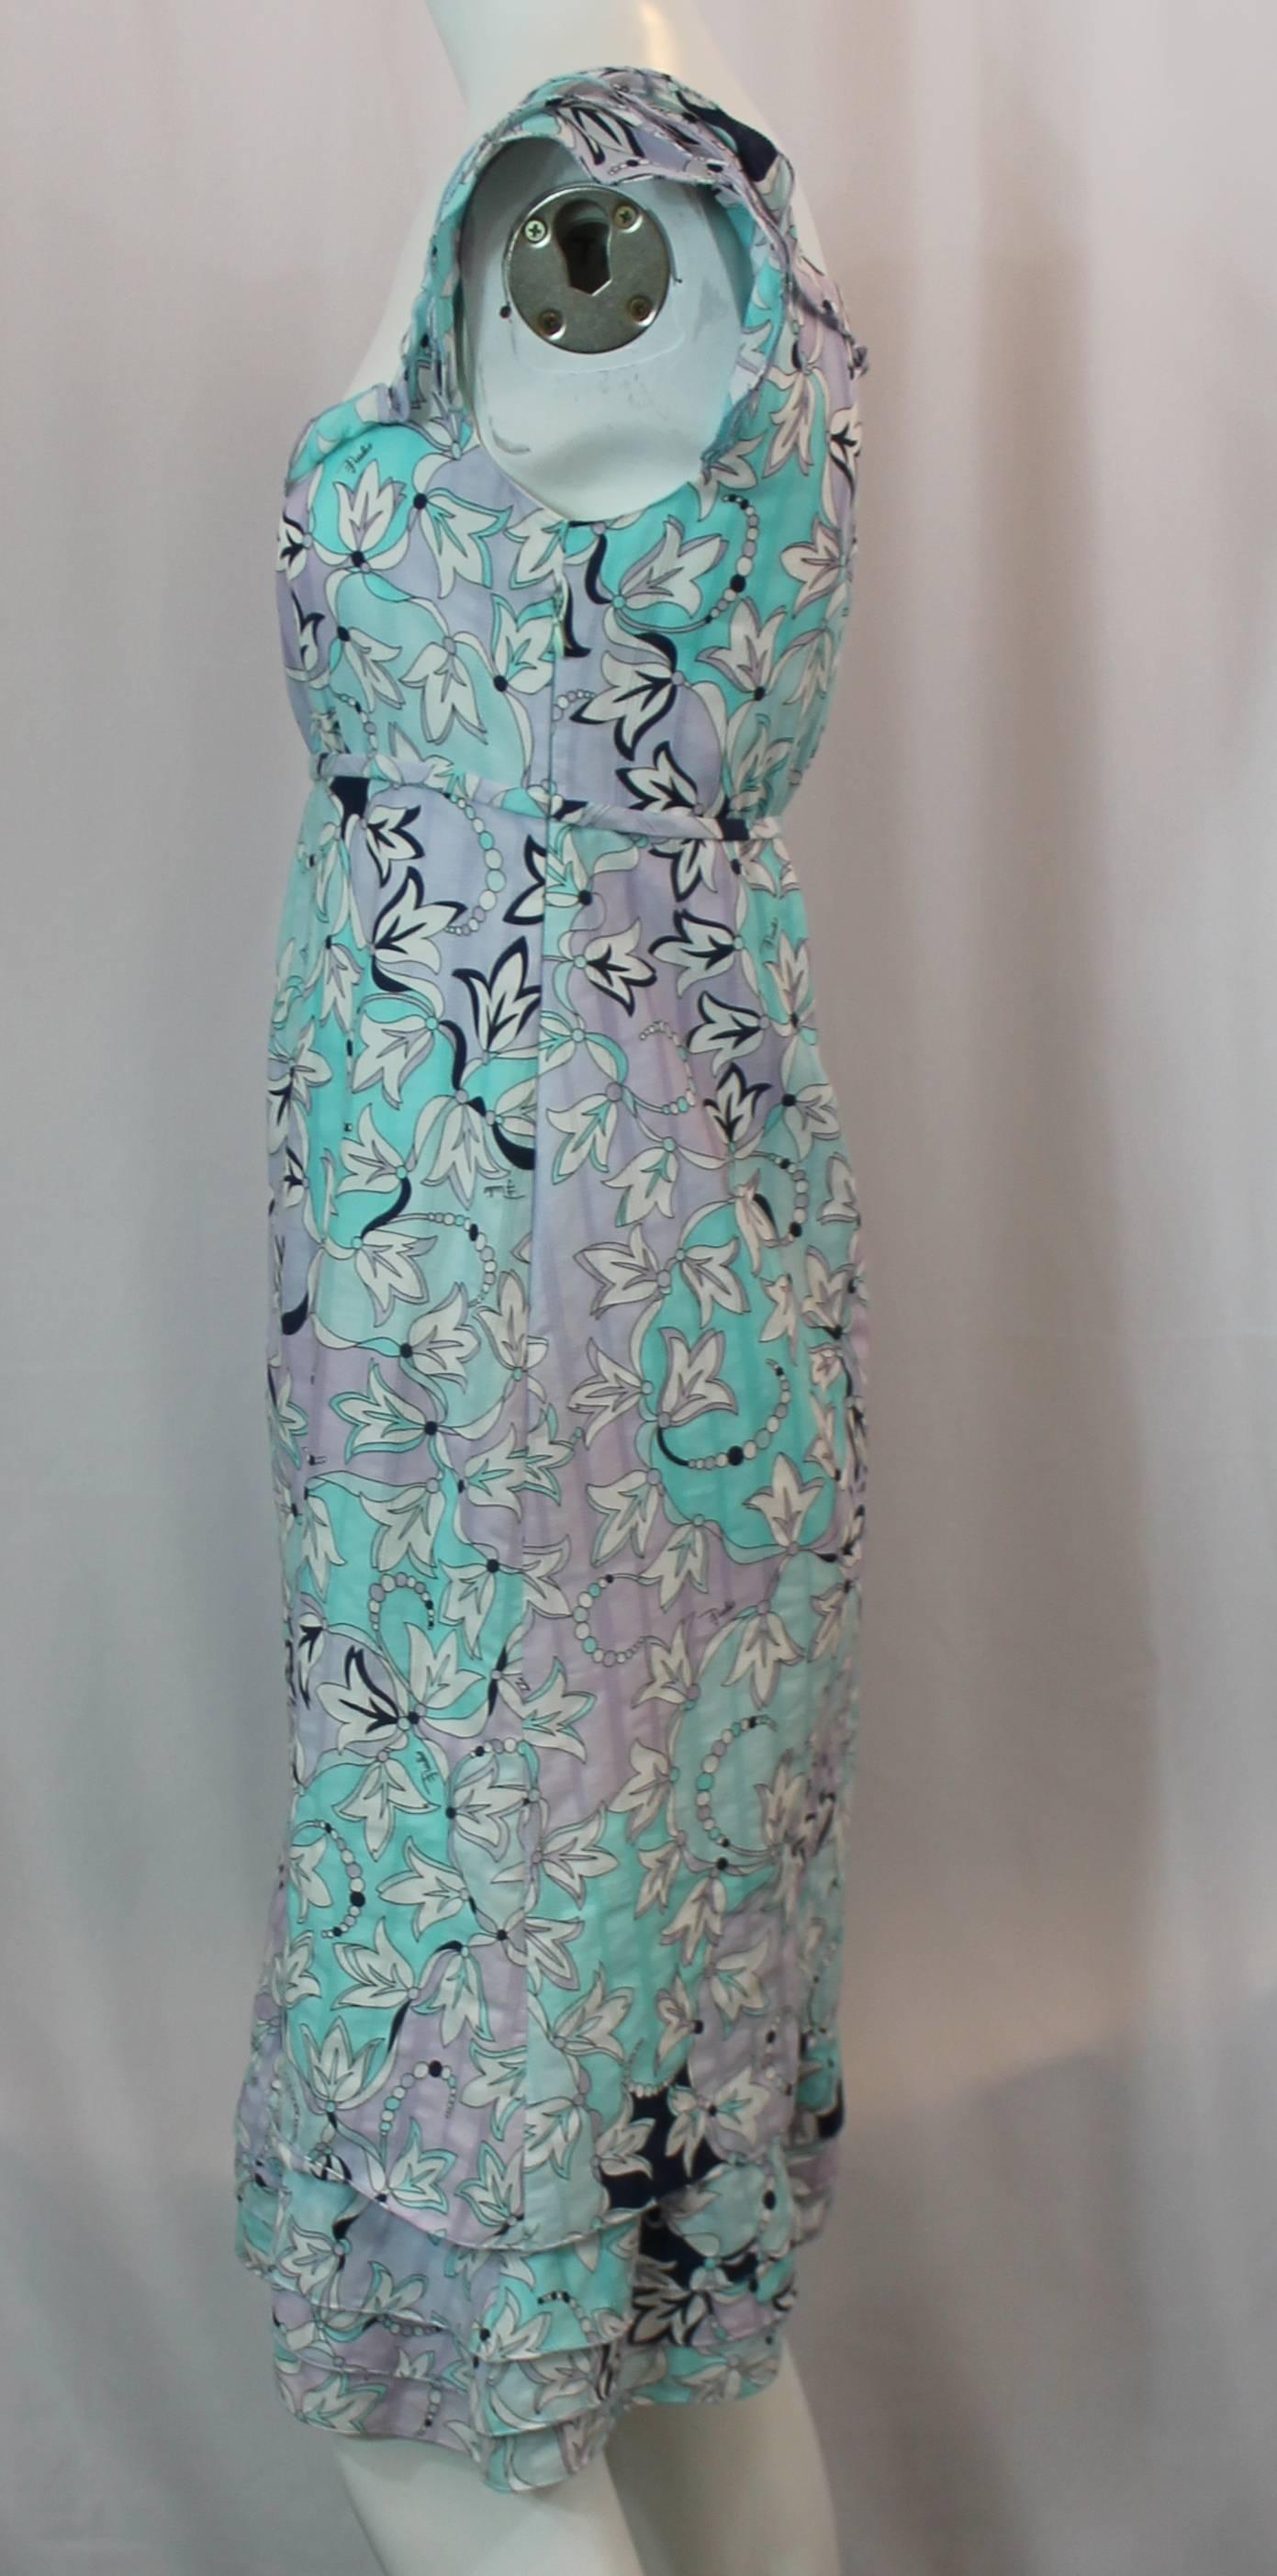 Emilio Pucci Floral Printed Pastel Blue and Lavender Cotton Dress with Cap Sleeves - 4. This loose fitting cotton dress is pastel blue and lavender and has a floral printed. It has cap sleeves with shutter pleats and an empire waist with cascading